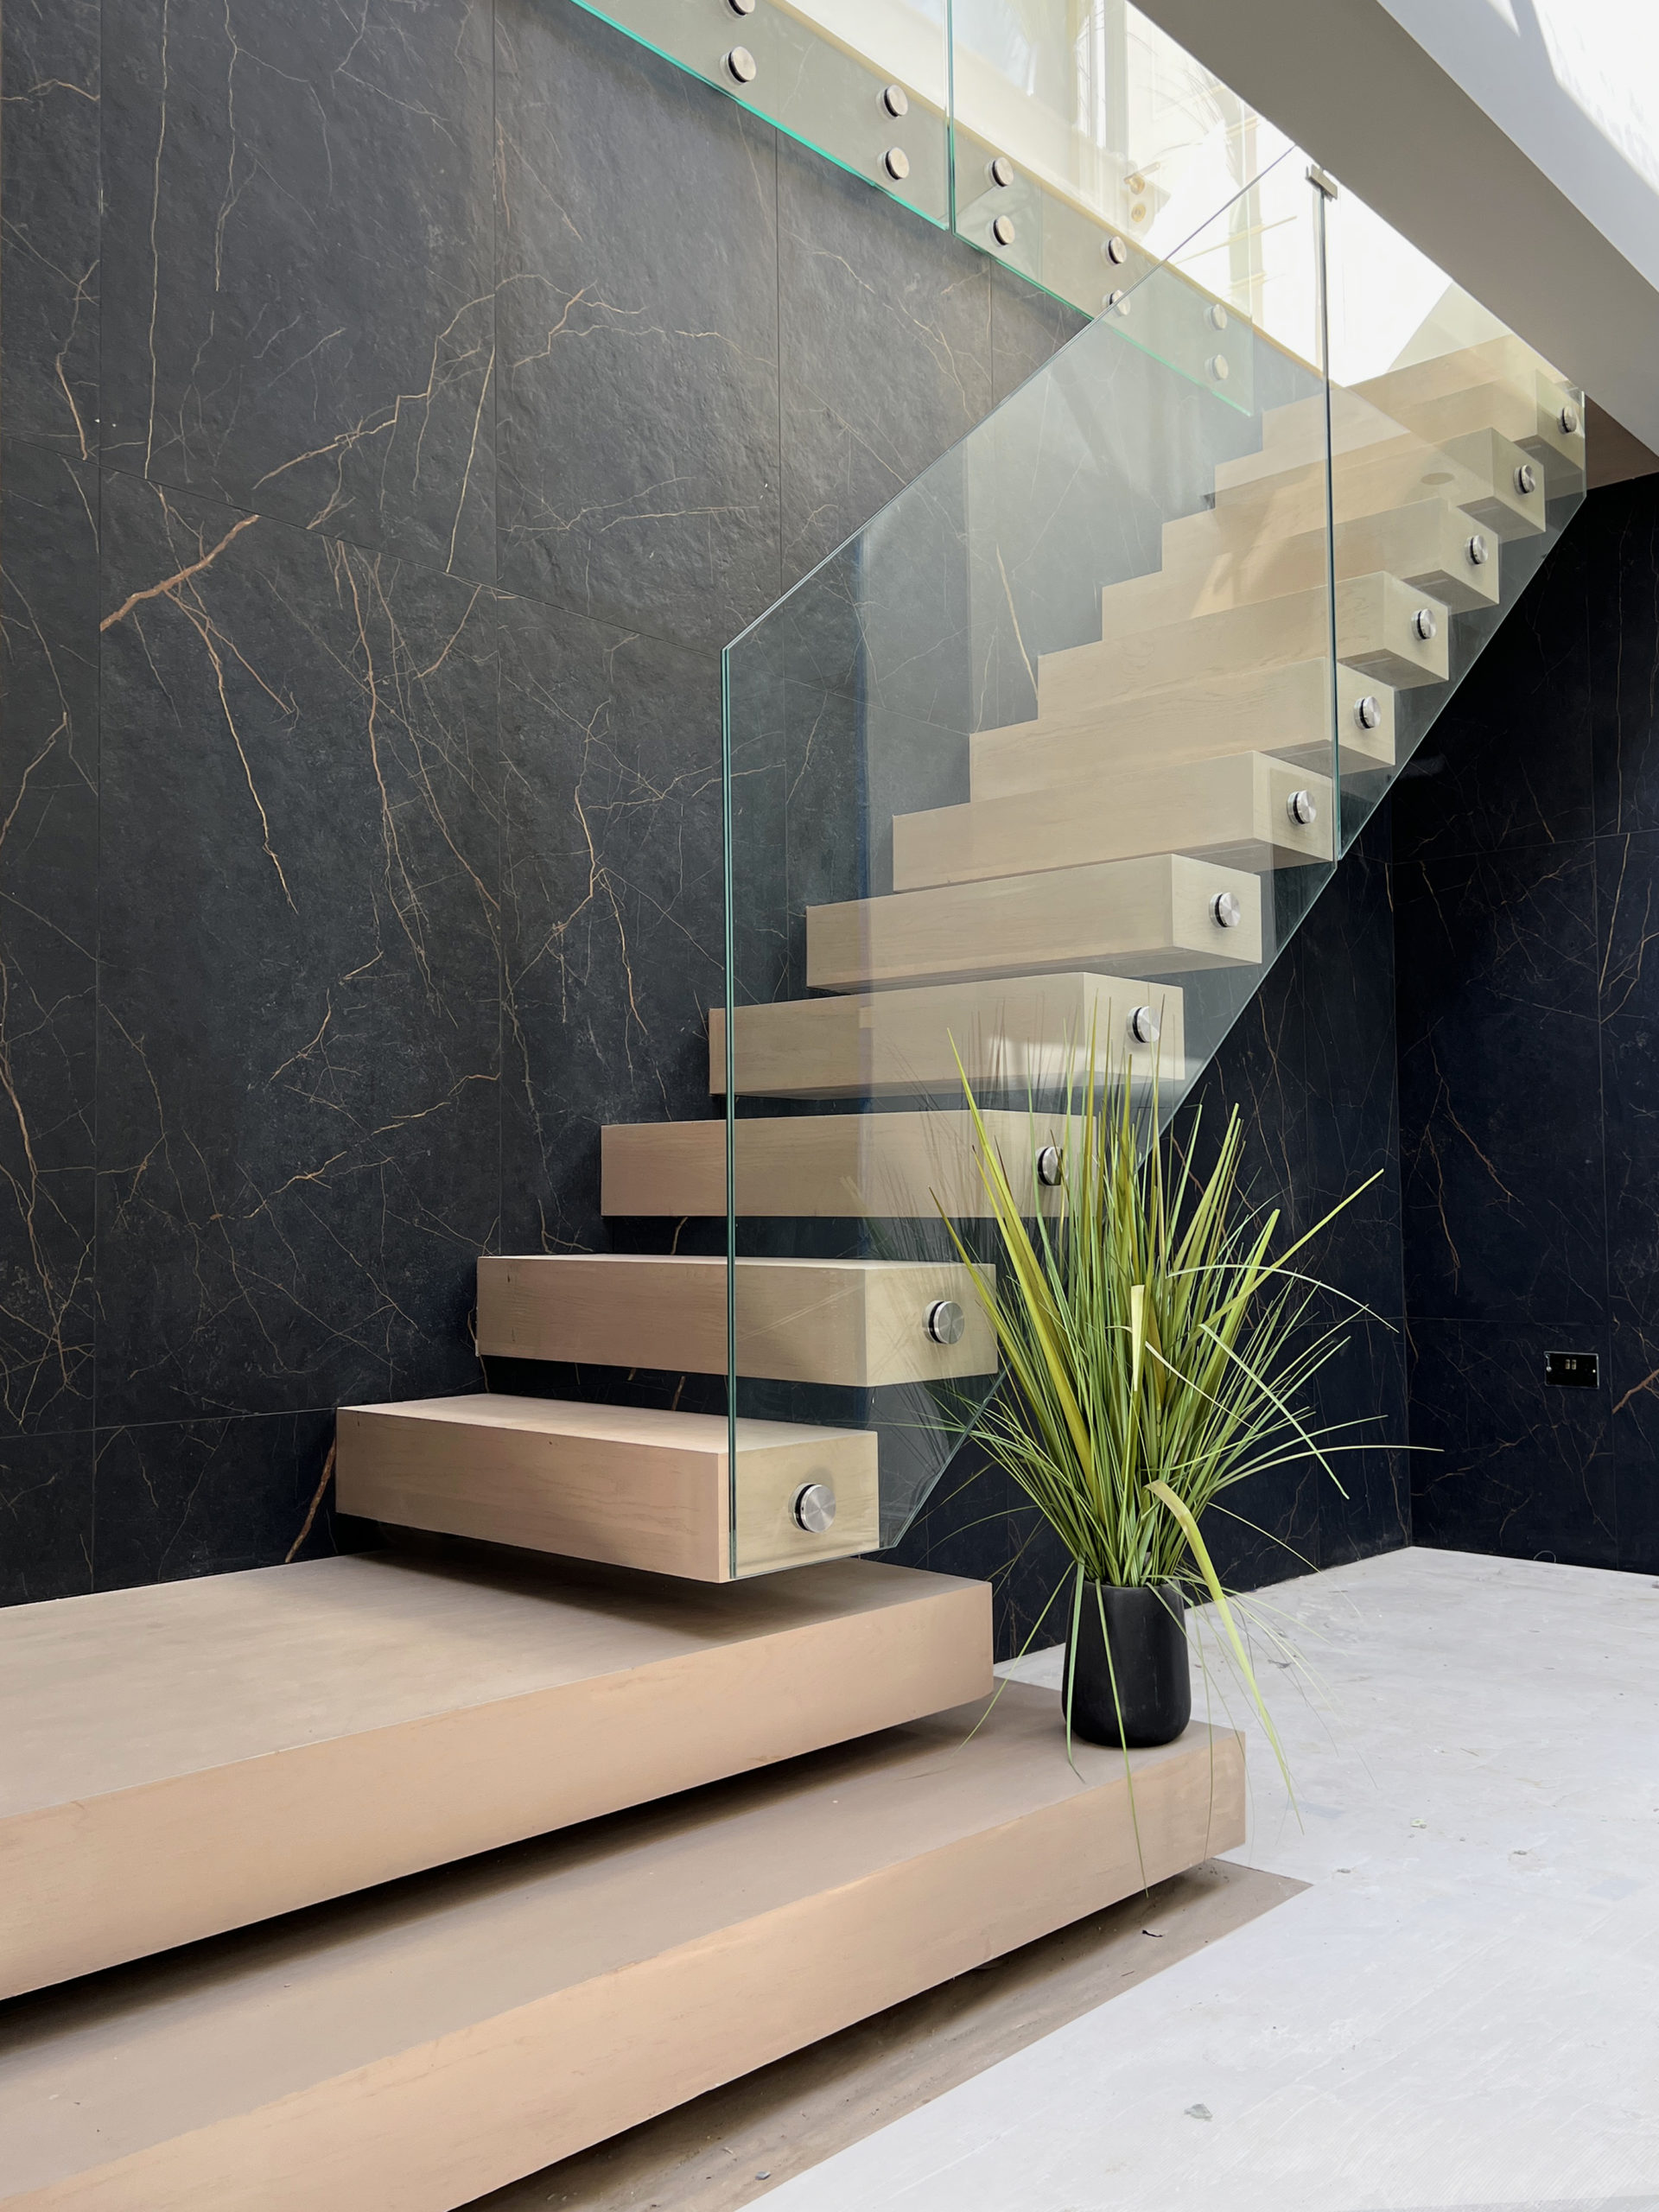 Floating staircase with glass balustrade, oak stair treads